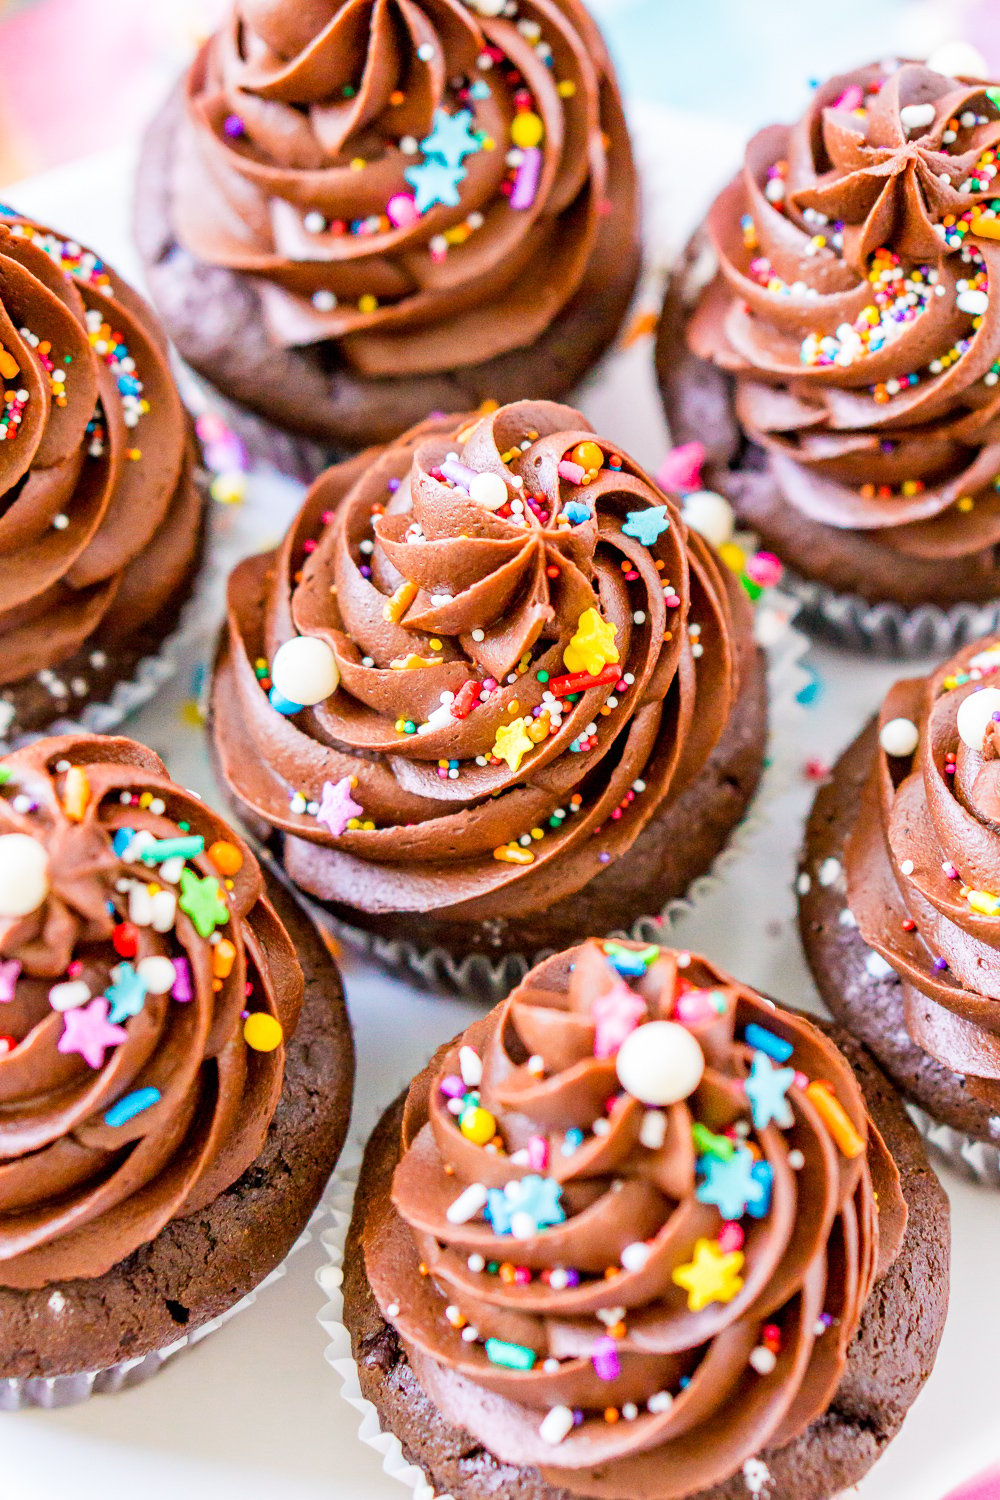 Chocolate Buttercream Frosting on chocolate cupcakes on white cake stand with colorful sprinkles.